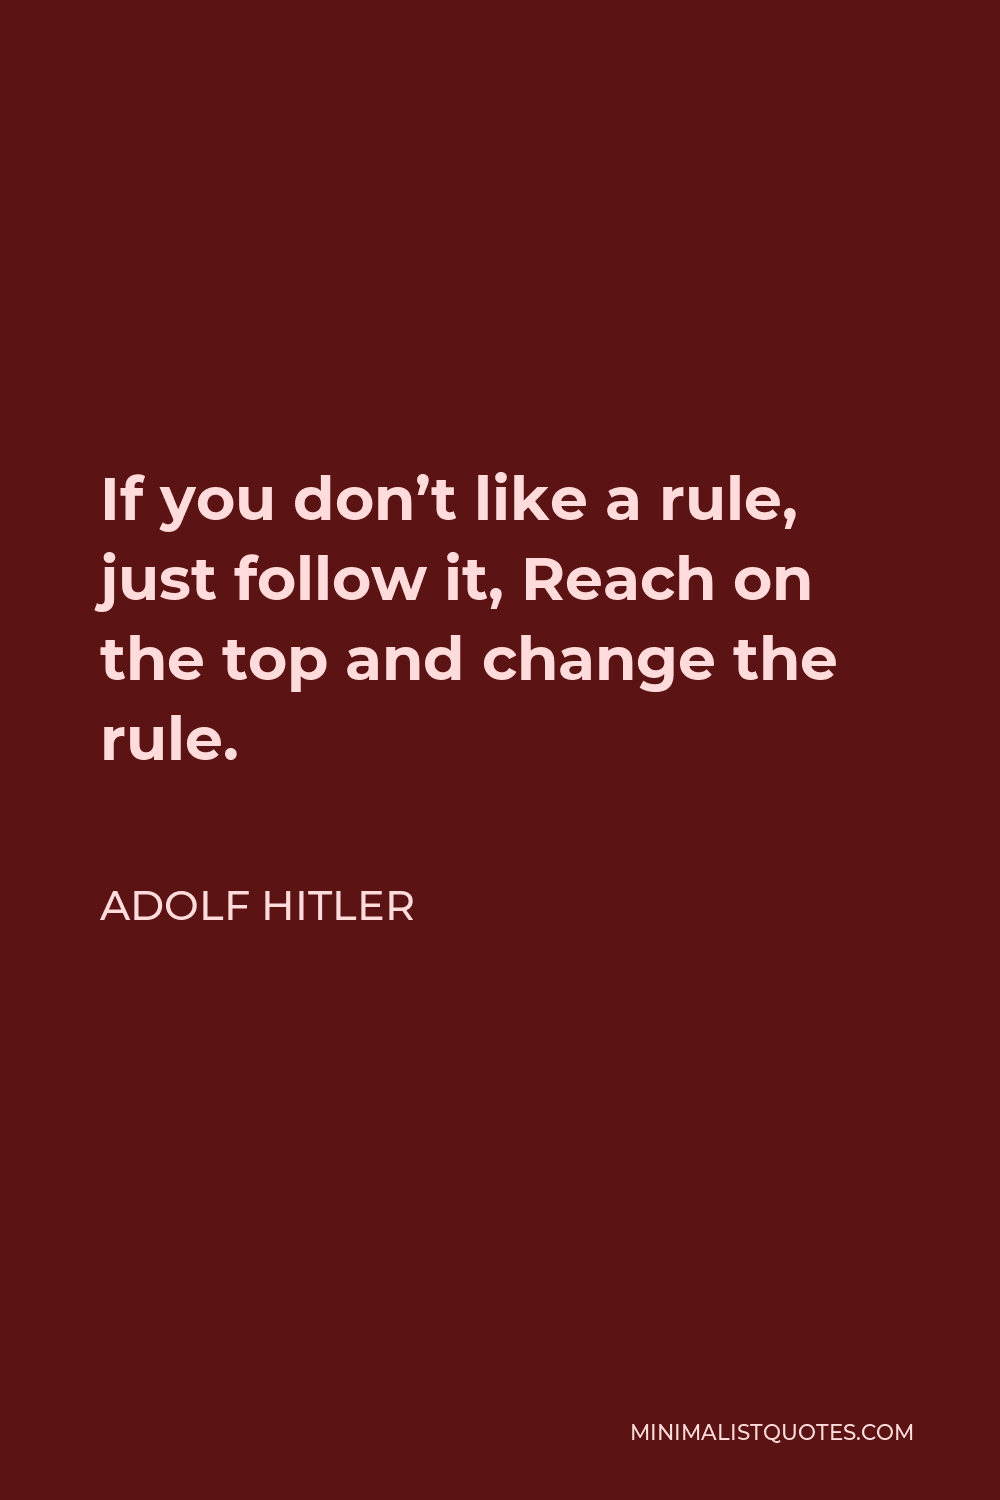 Adolf Hitler Quote - If you don’t like a rule, just follow it, Reach on the top and change the rule.